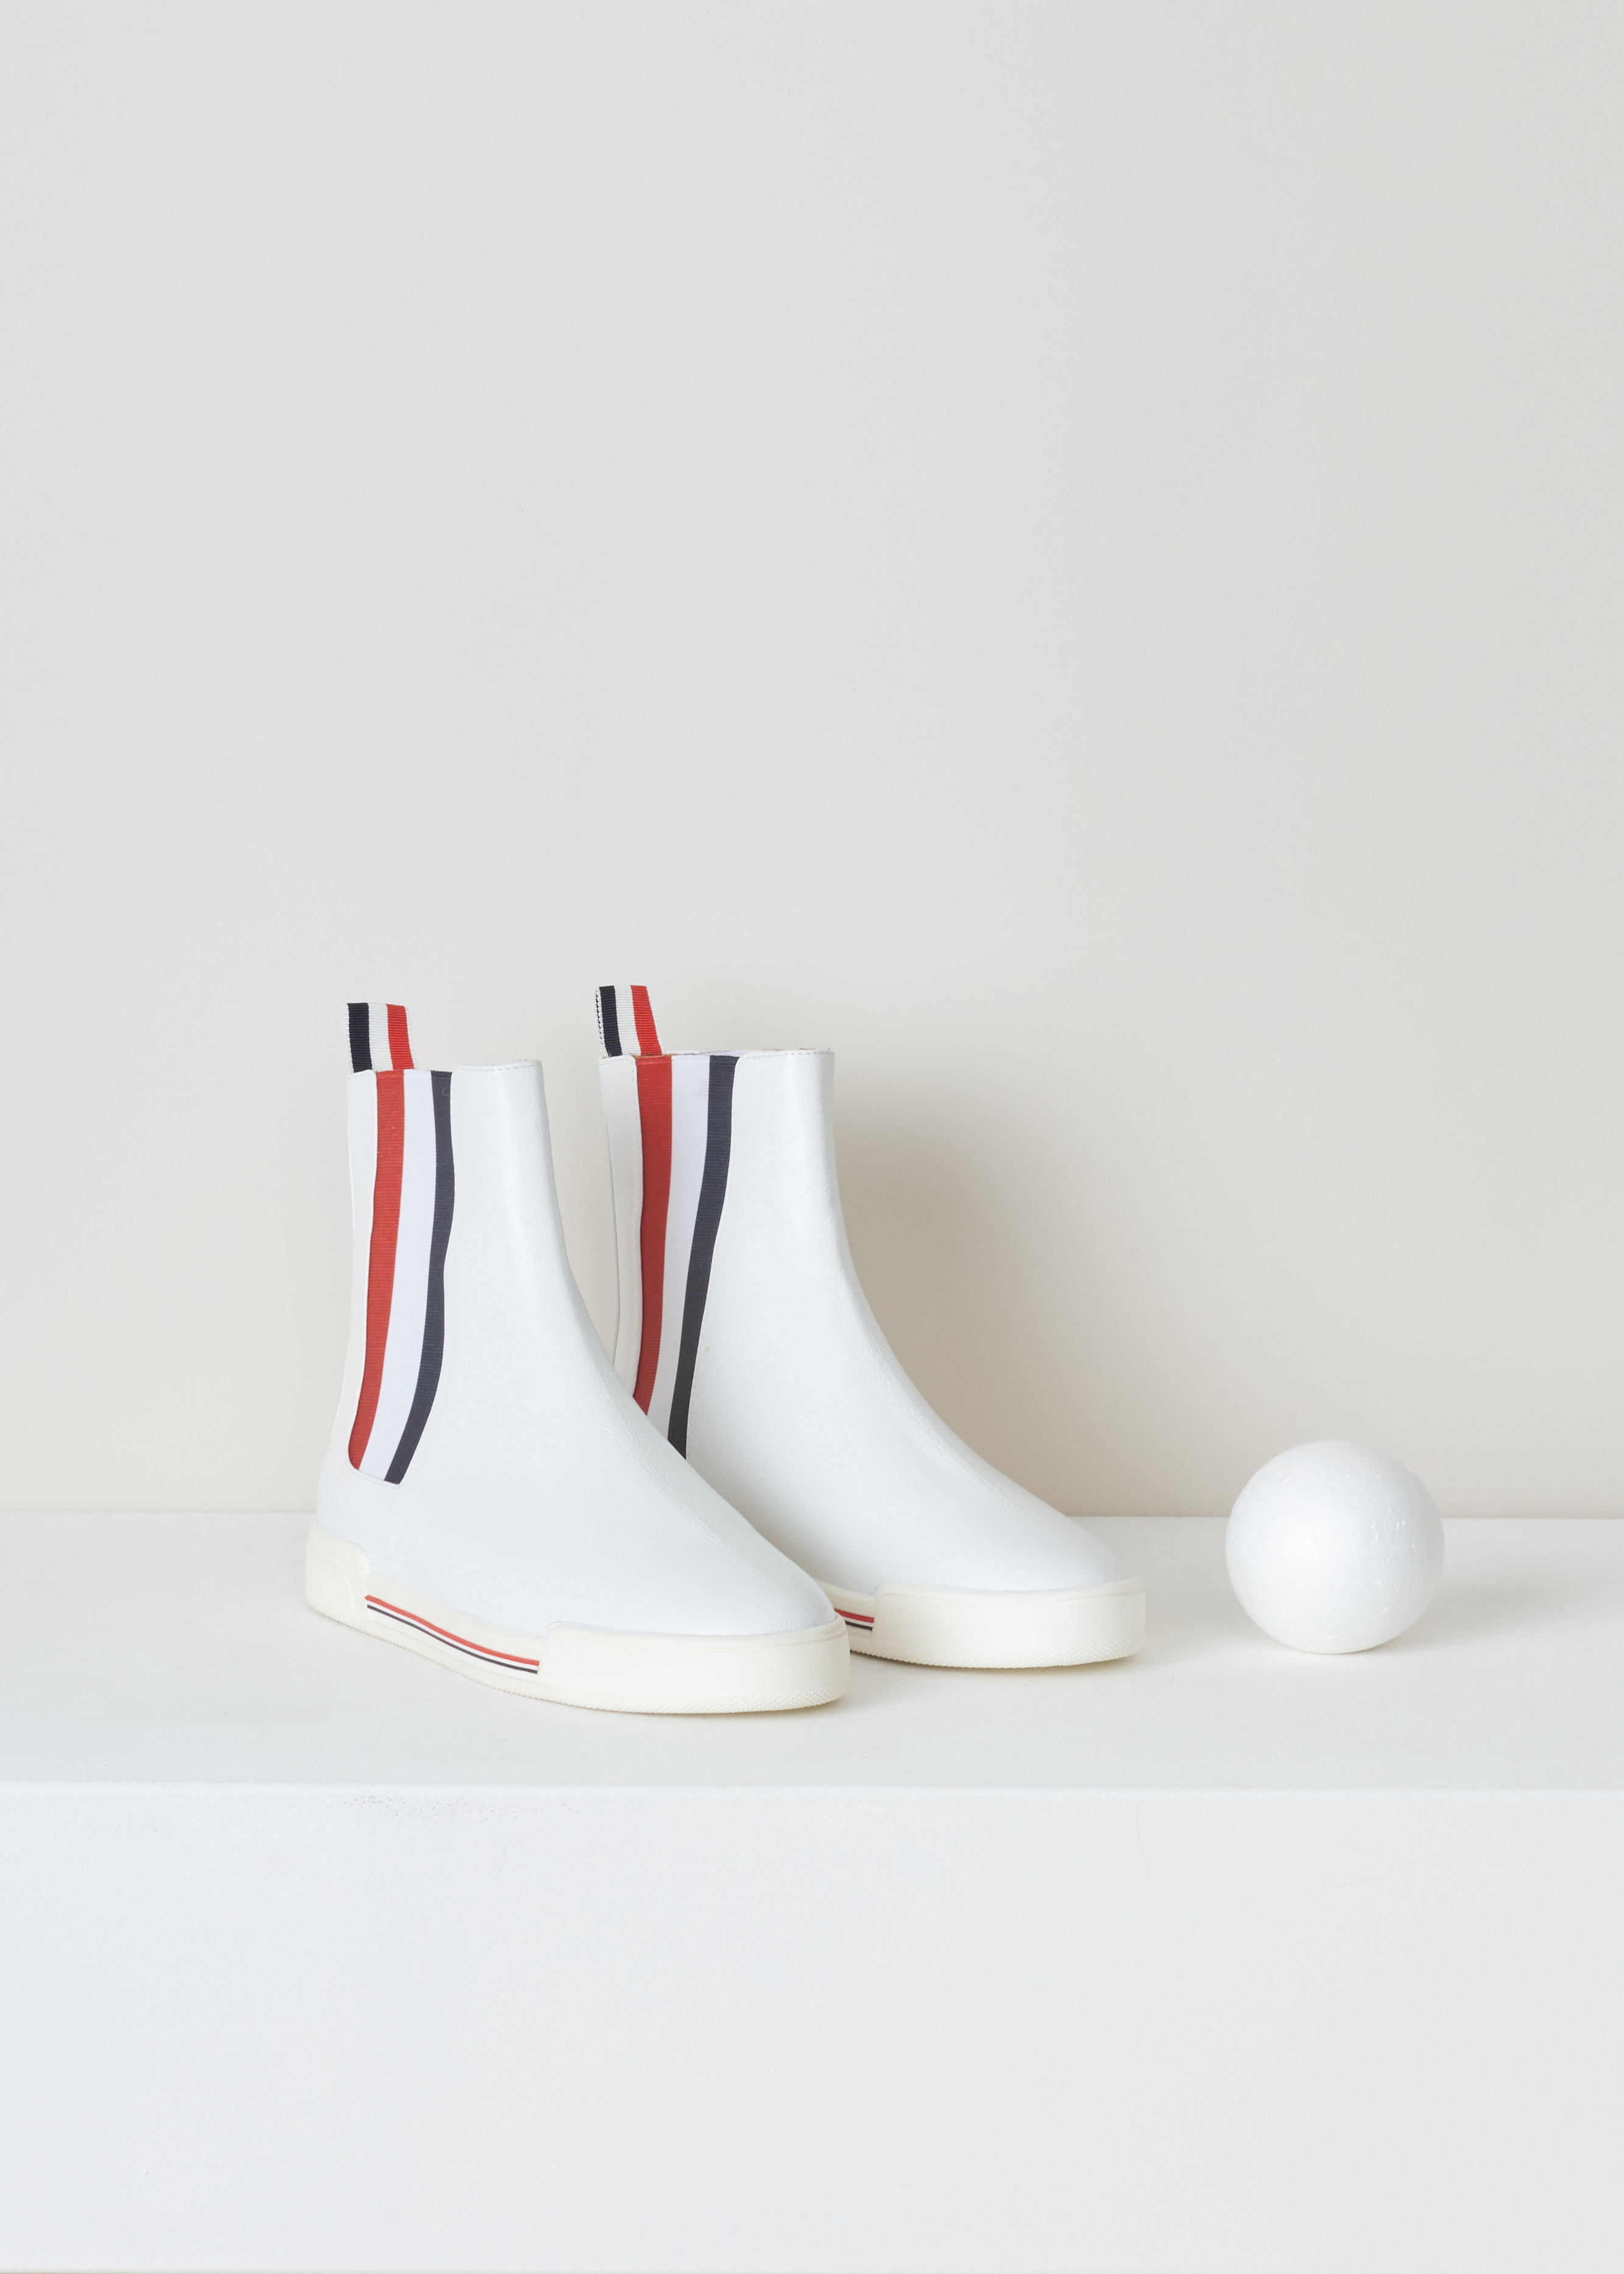 Thom Browne Chelsea boot sneaker white FFB056B_03542_100 white front. White leather chelsea boot with red and blue striped elastic side panels, a rounded toe, a pull tab at the back and a white rubber sole with red and blue detailing. 